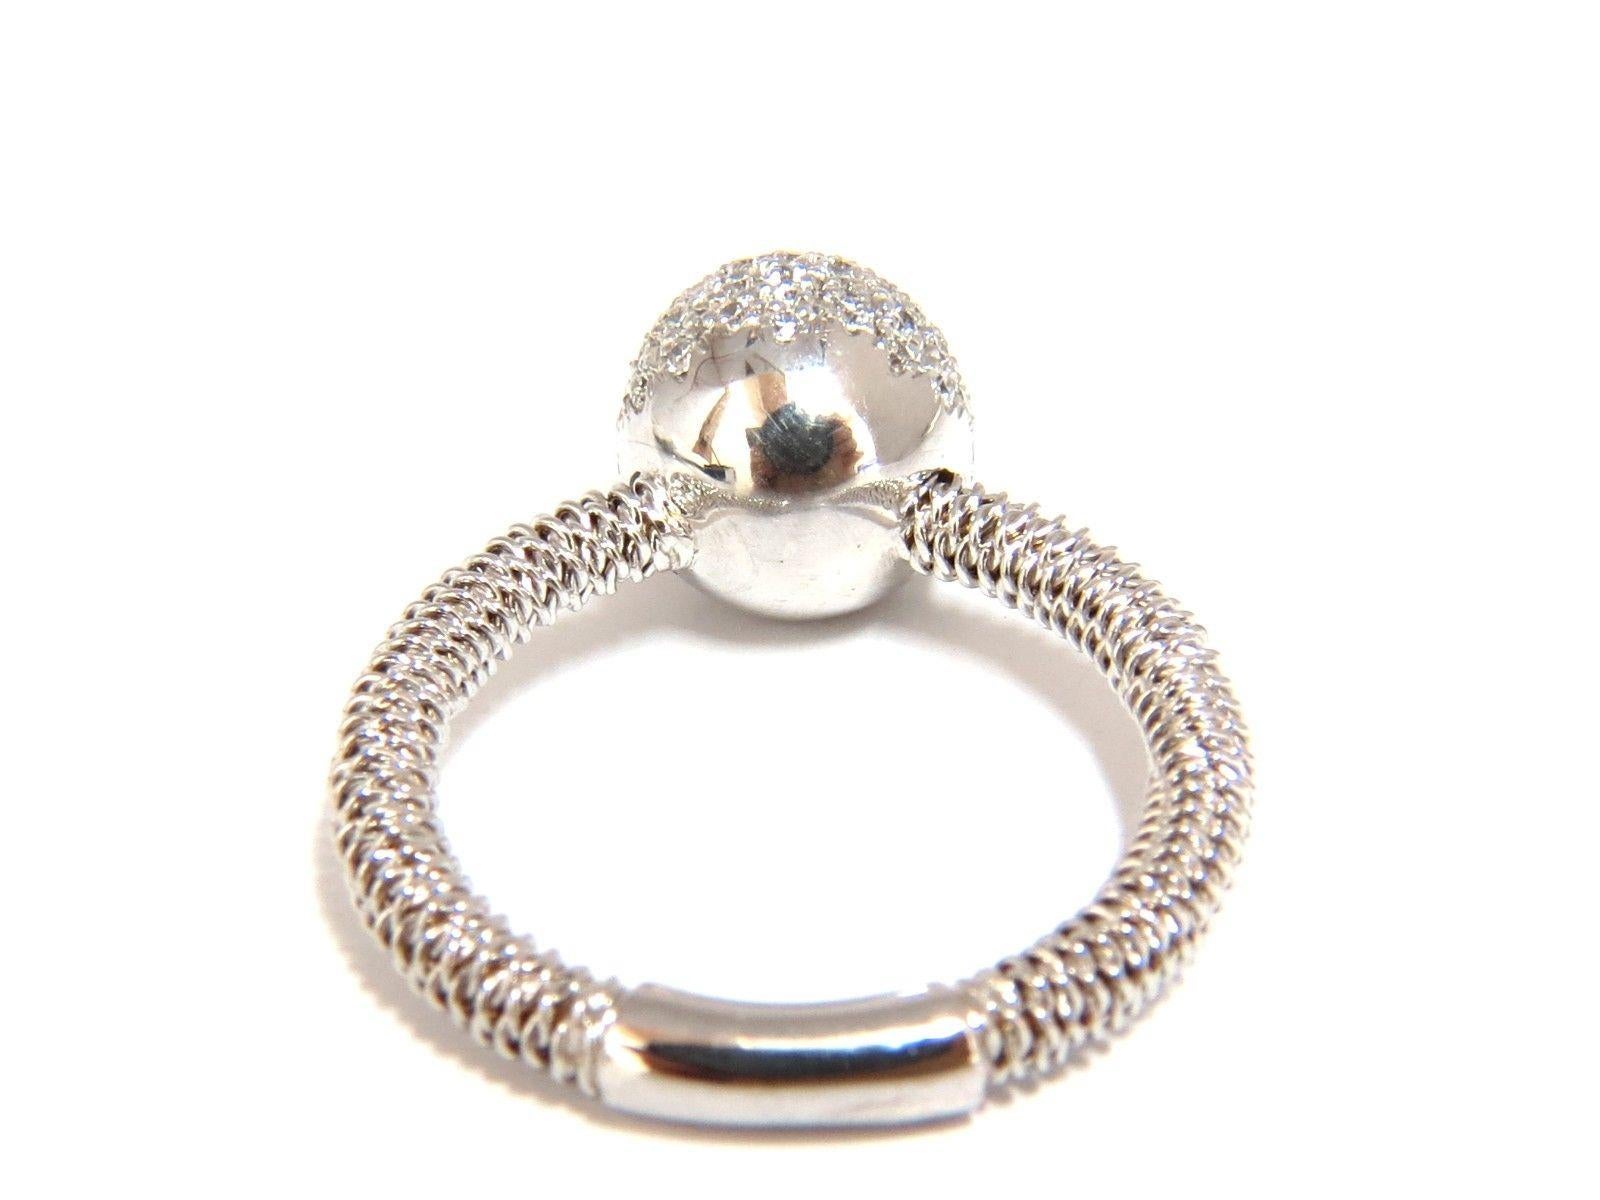 .76ct. Rounds diamond ring / encrusted ball.

ring goes through the ball.

nicely made.

Diamonds:

G-color, Vs-2  clarity

18kt. white gold

5.8 grams.

current ring size: 

6.75

Ball is 9.3mm wide.

Gorgeous coil wrap patina on shank of